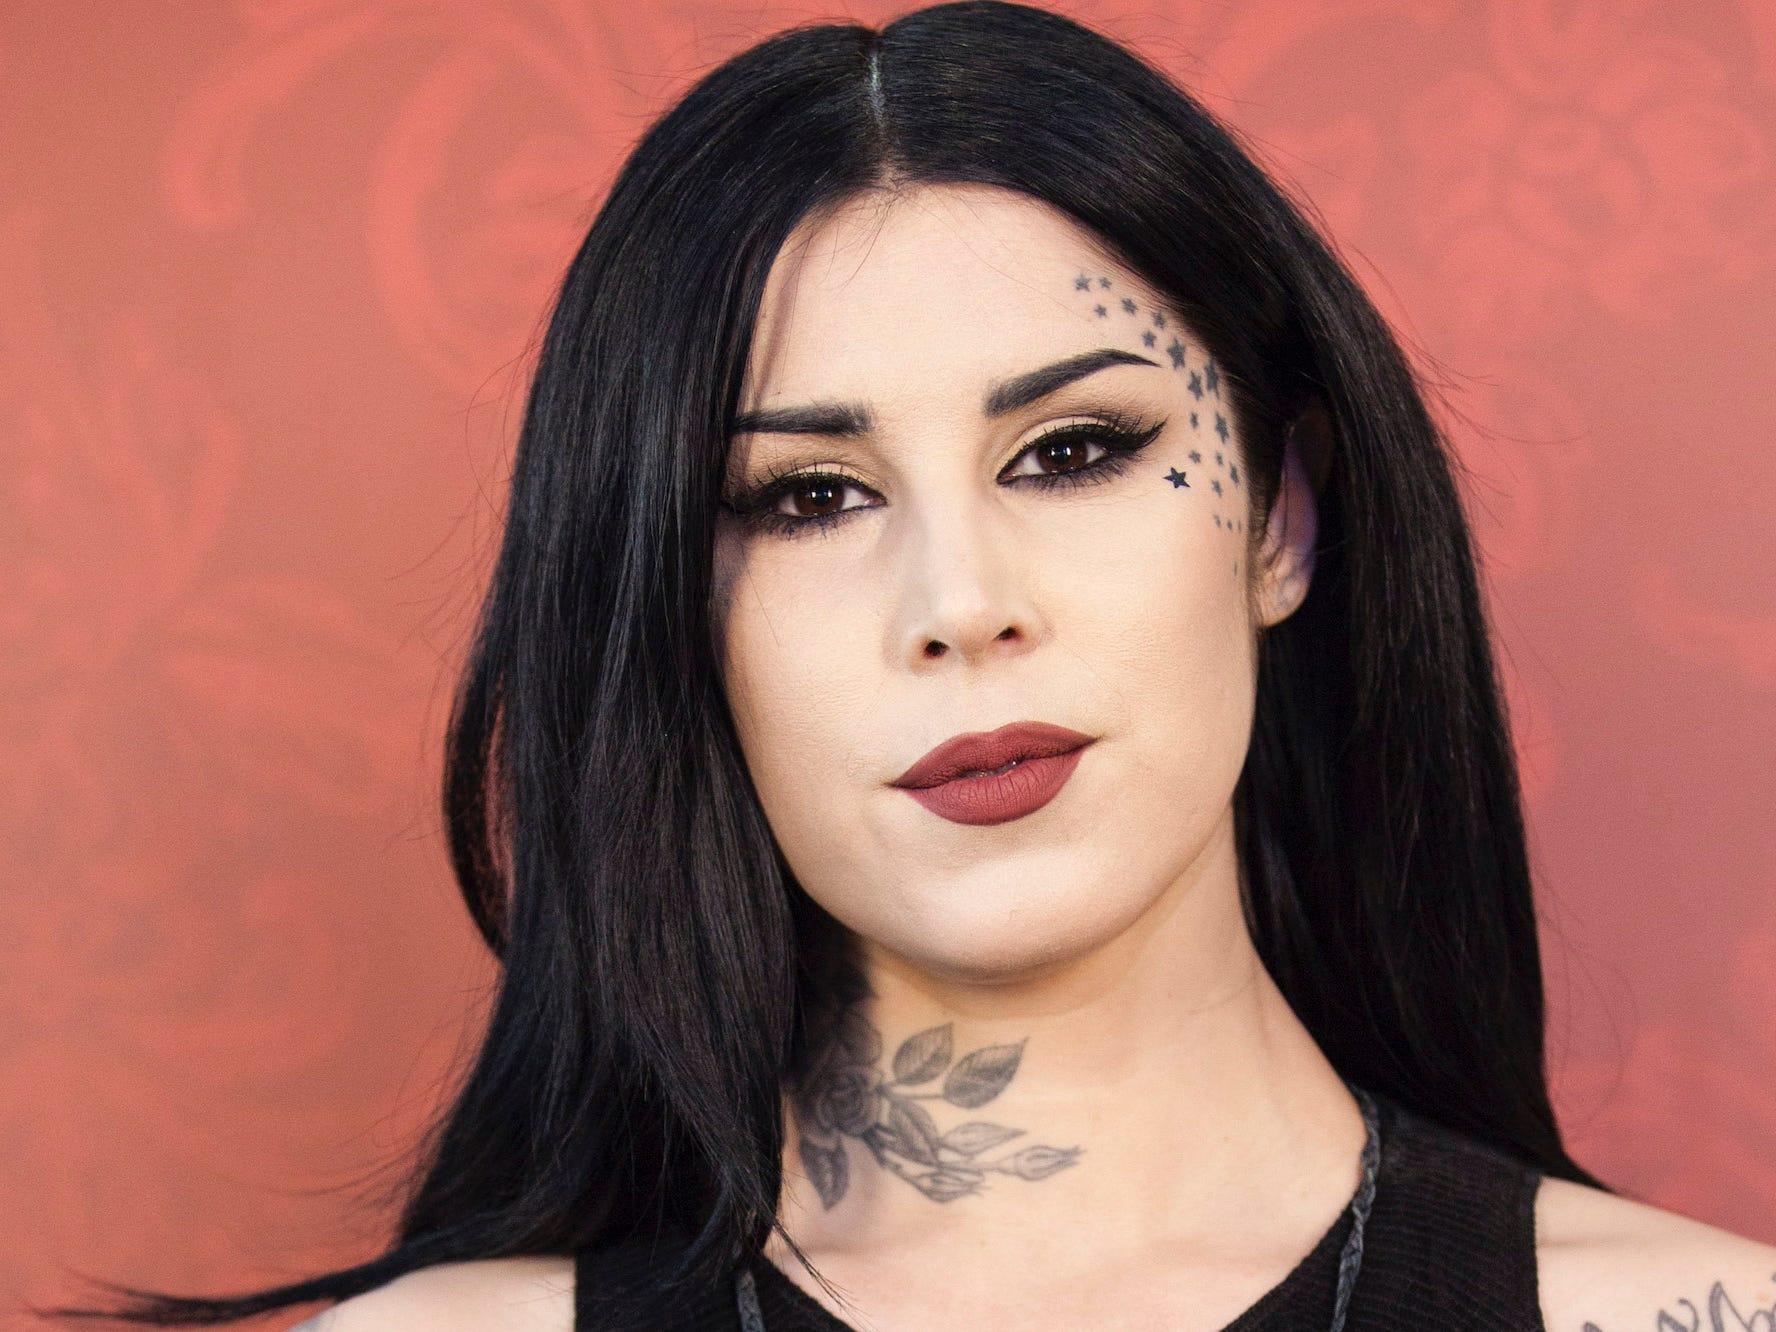 Kat Von D says she wishes her former makeup line would remove her ...